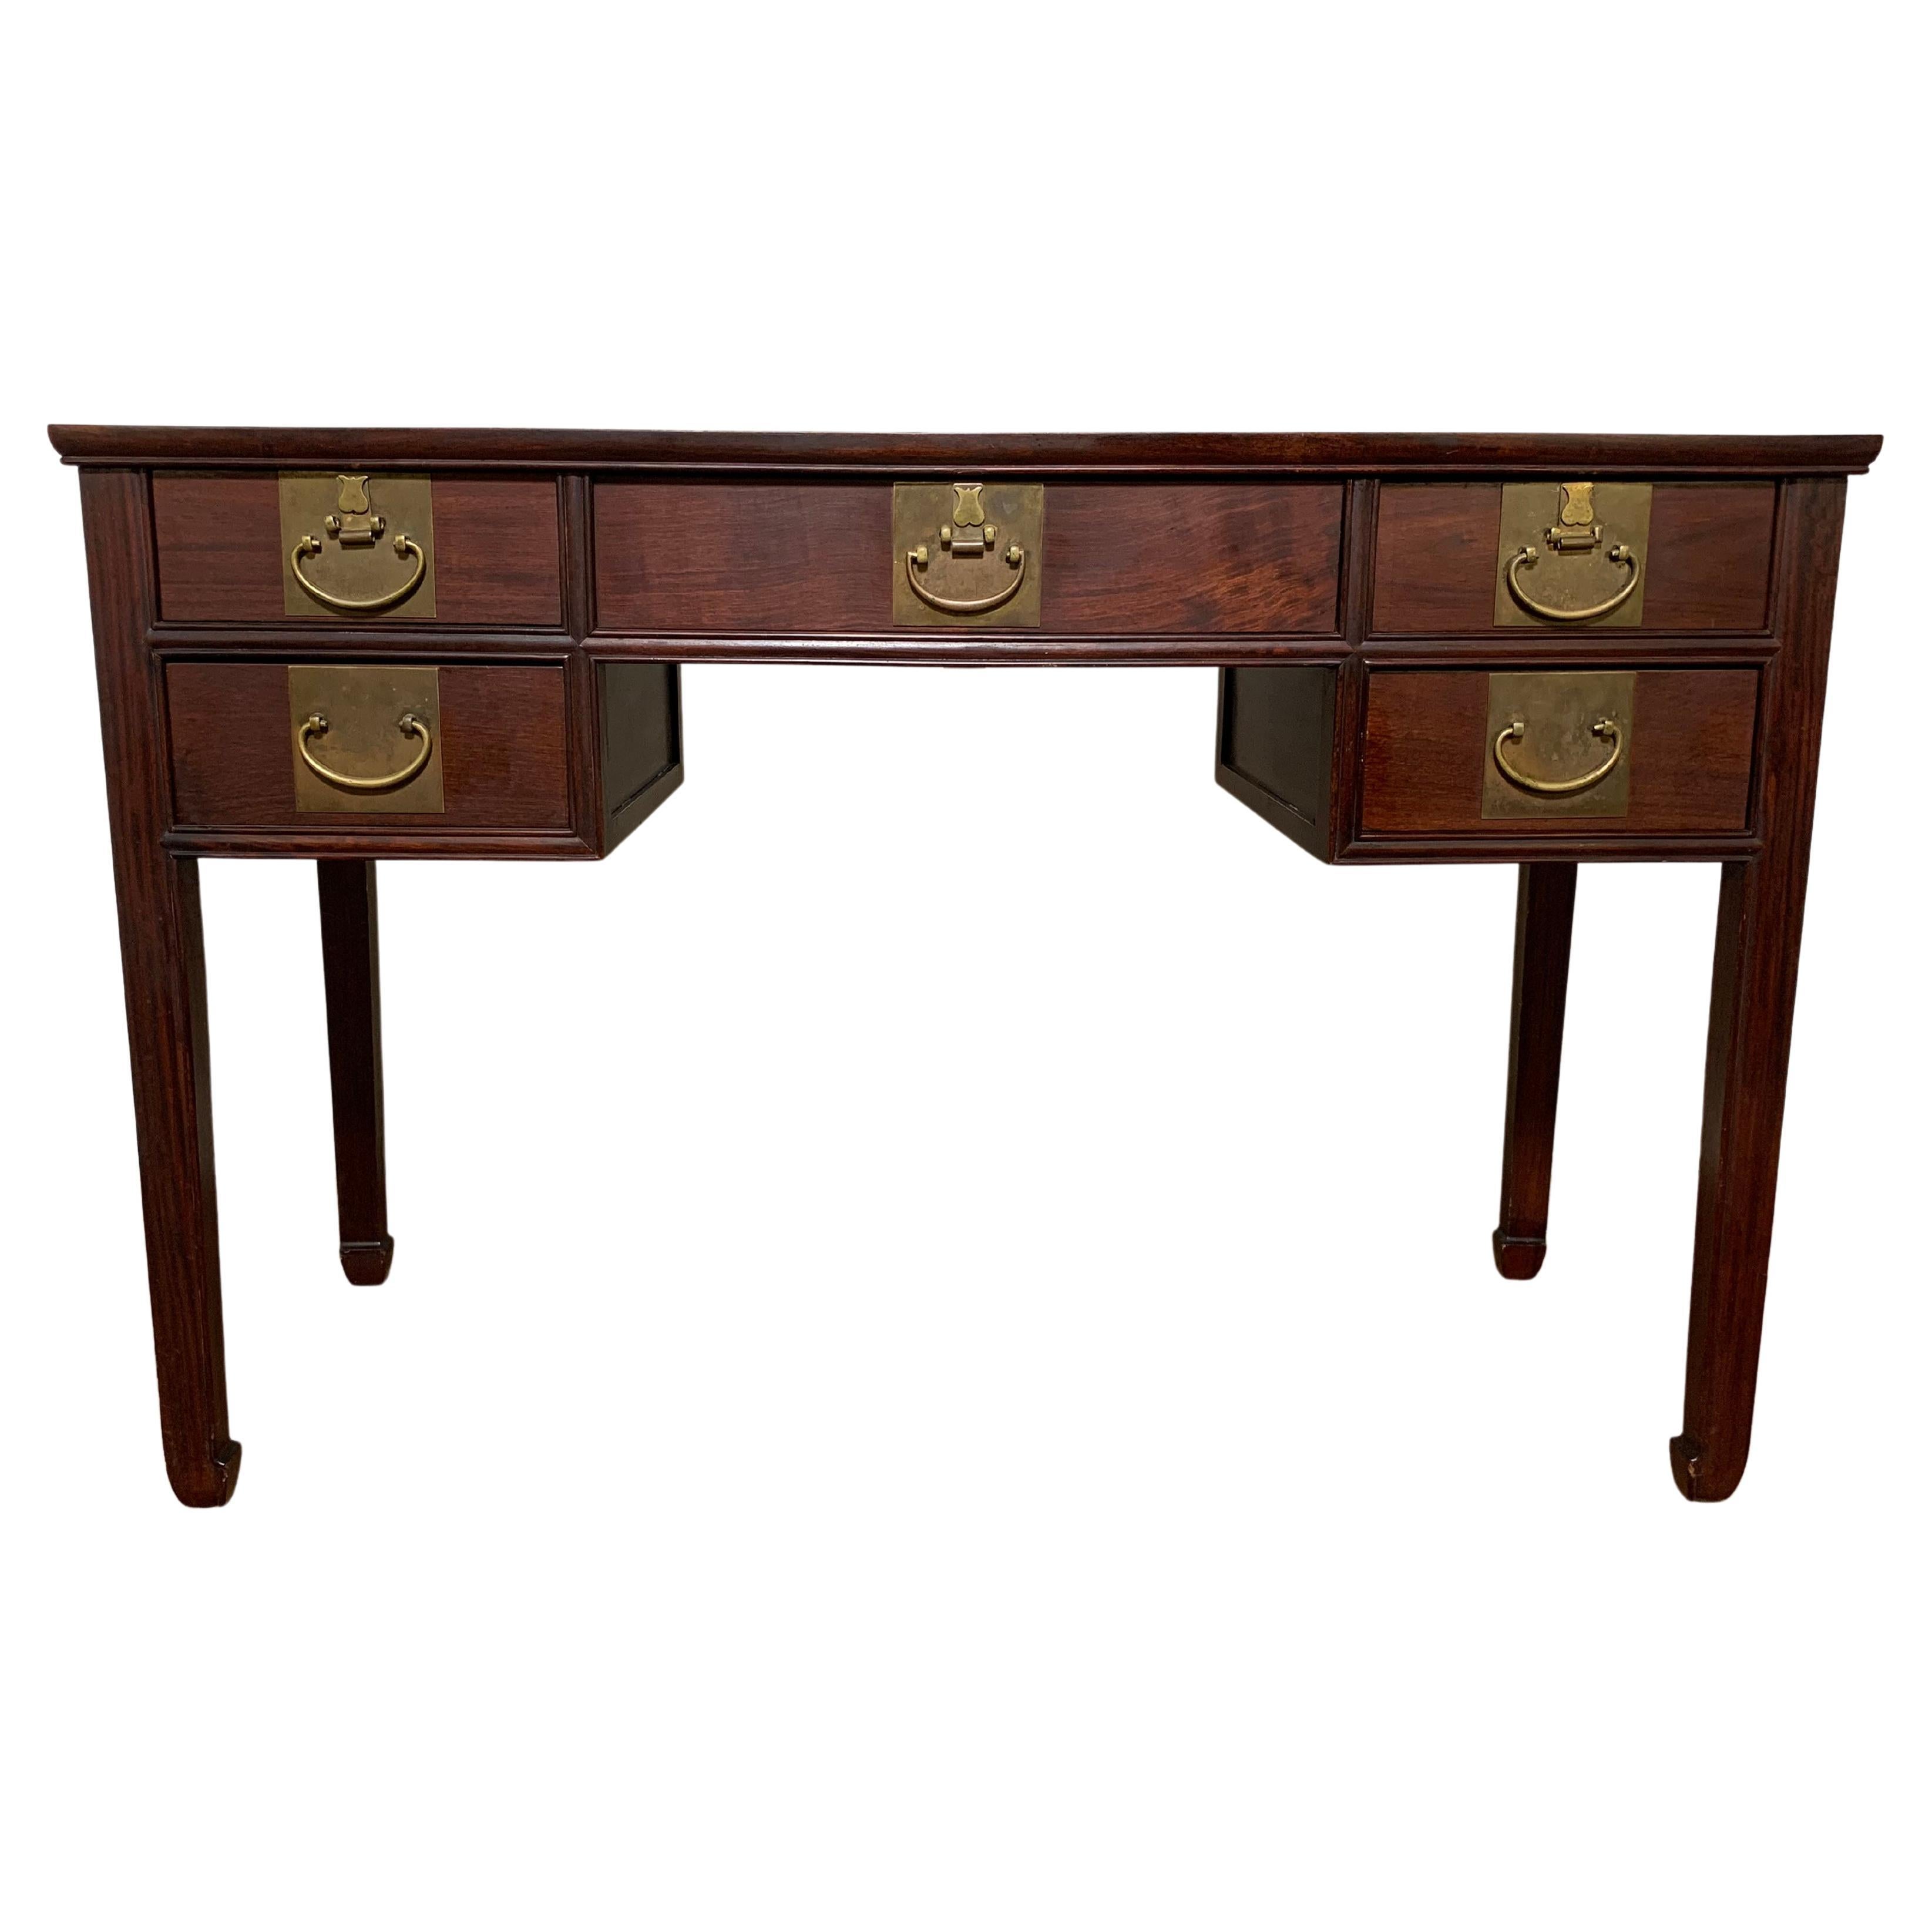 Anglo-Indian Colonial Plantation Desk in Teak